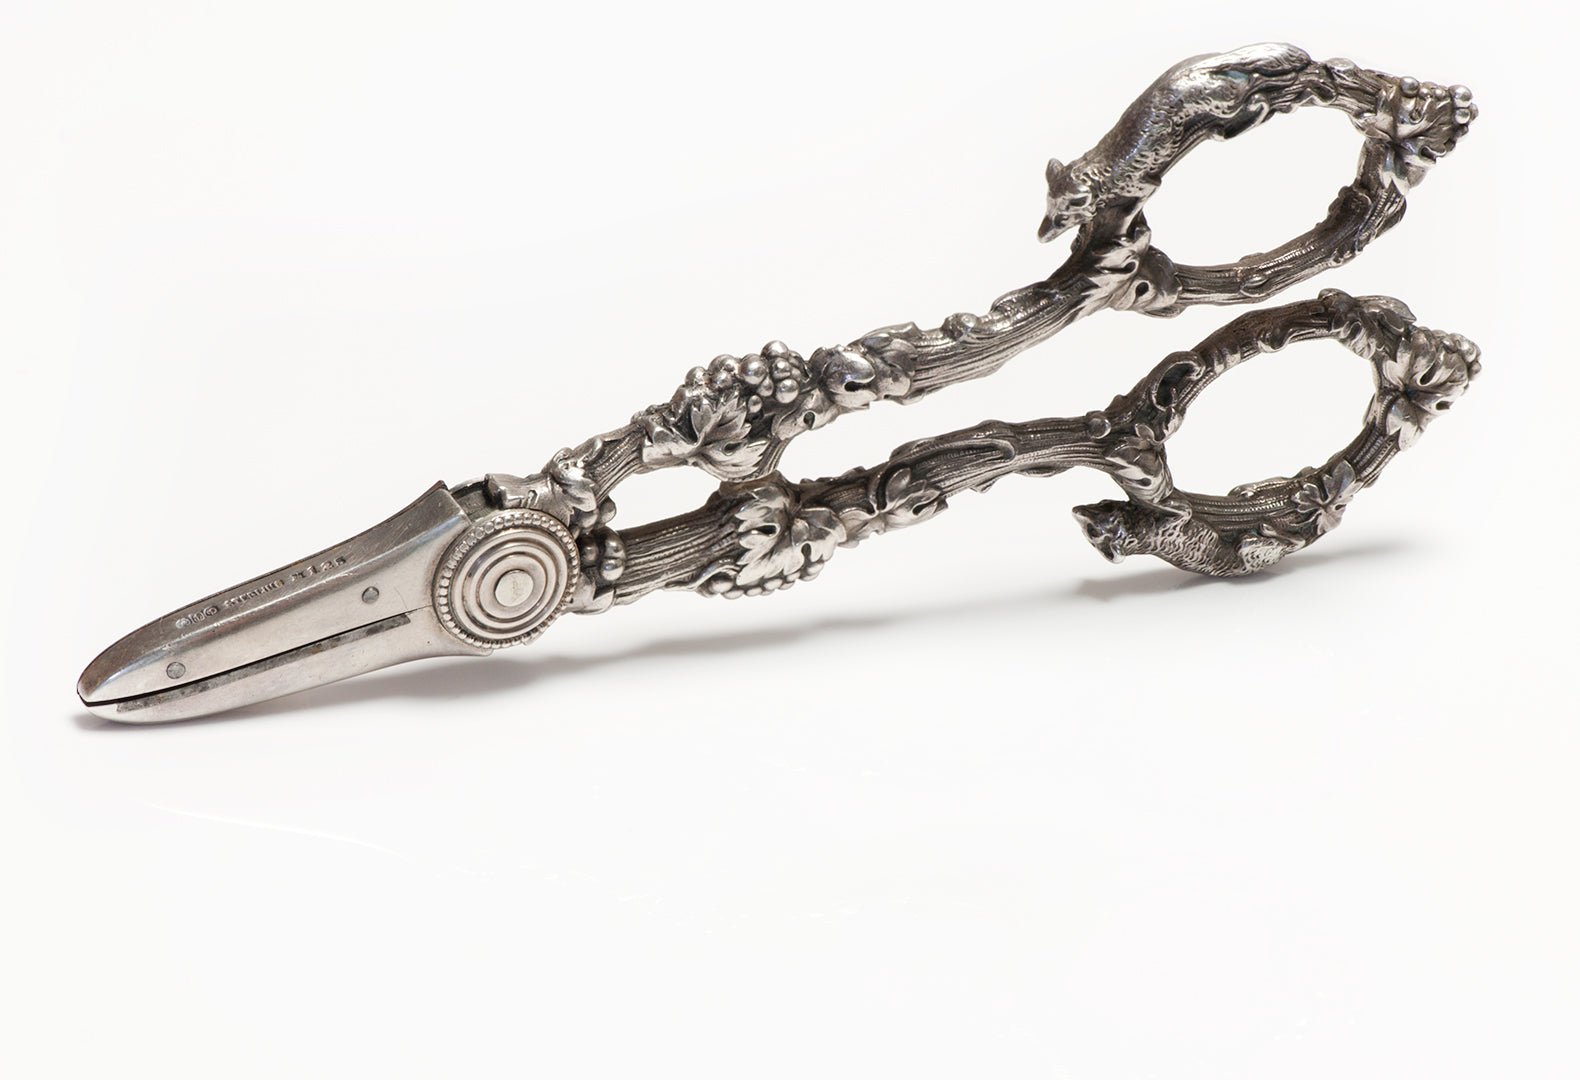 Antique Gorham Sterling Silver Grape Shears "Fox and Grape" Pattern - DSF Antique Jewelry